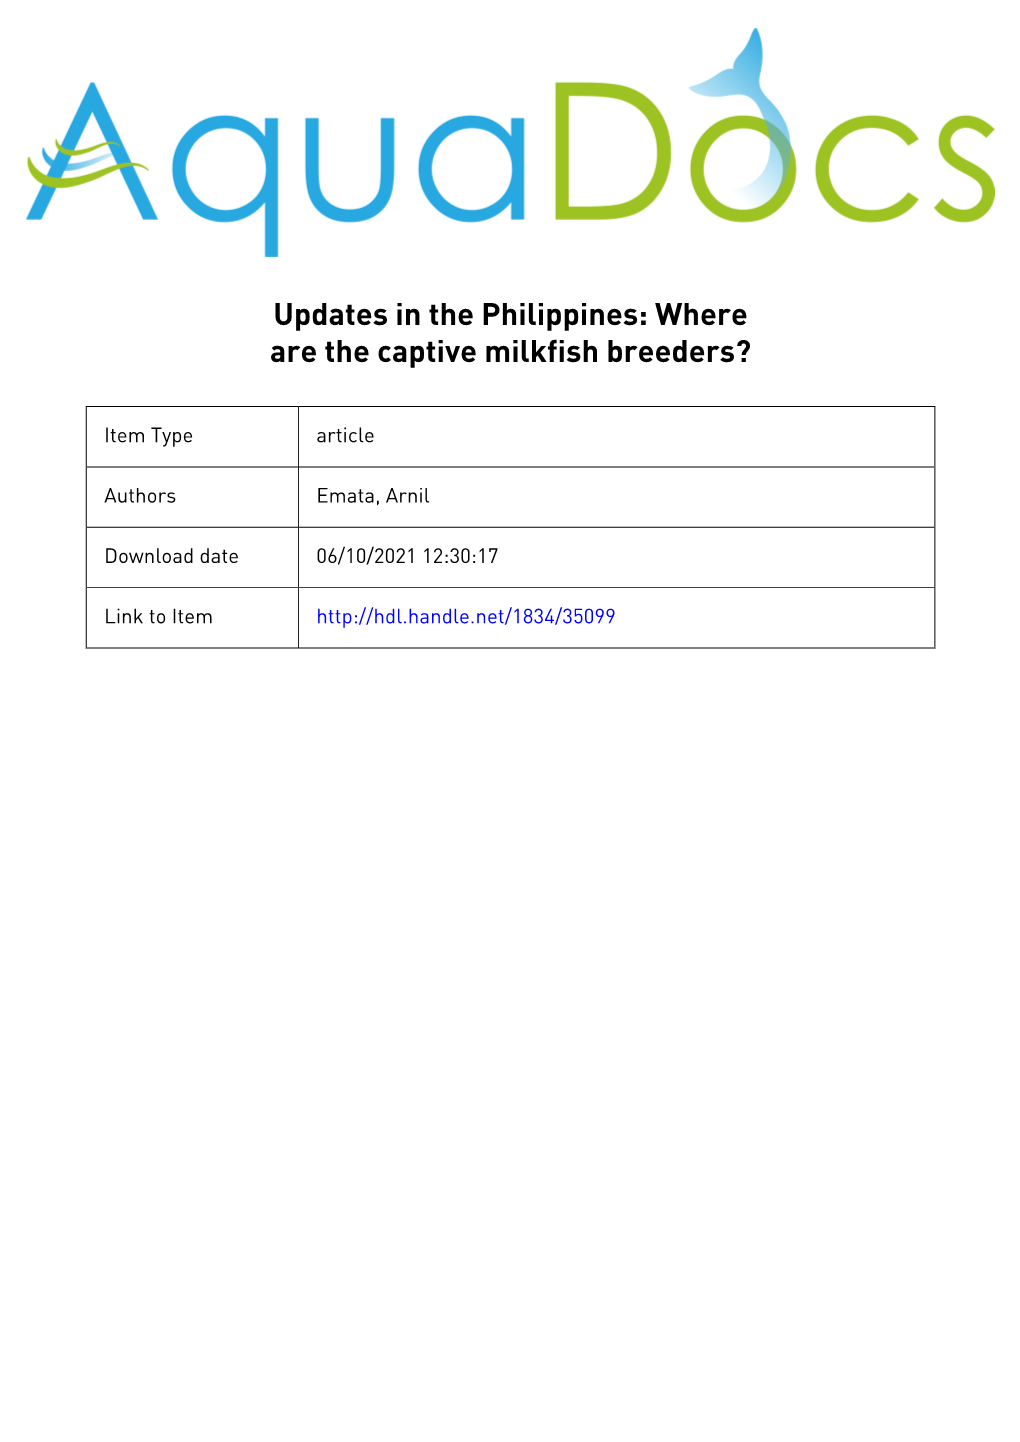 Updates in the Philippines: Where Are the Captive Milkfish Breeders?